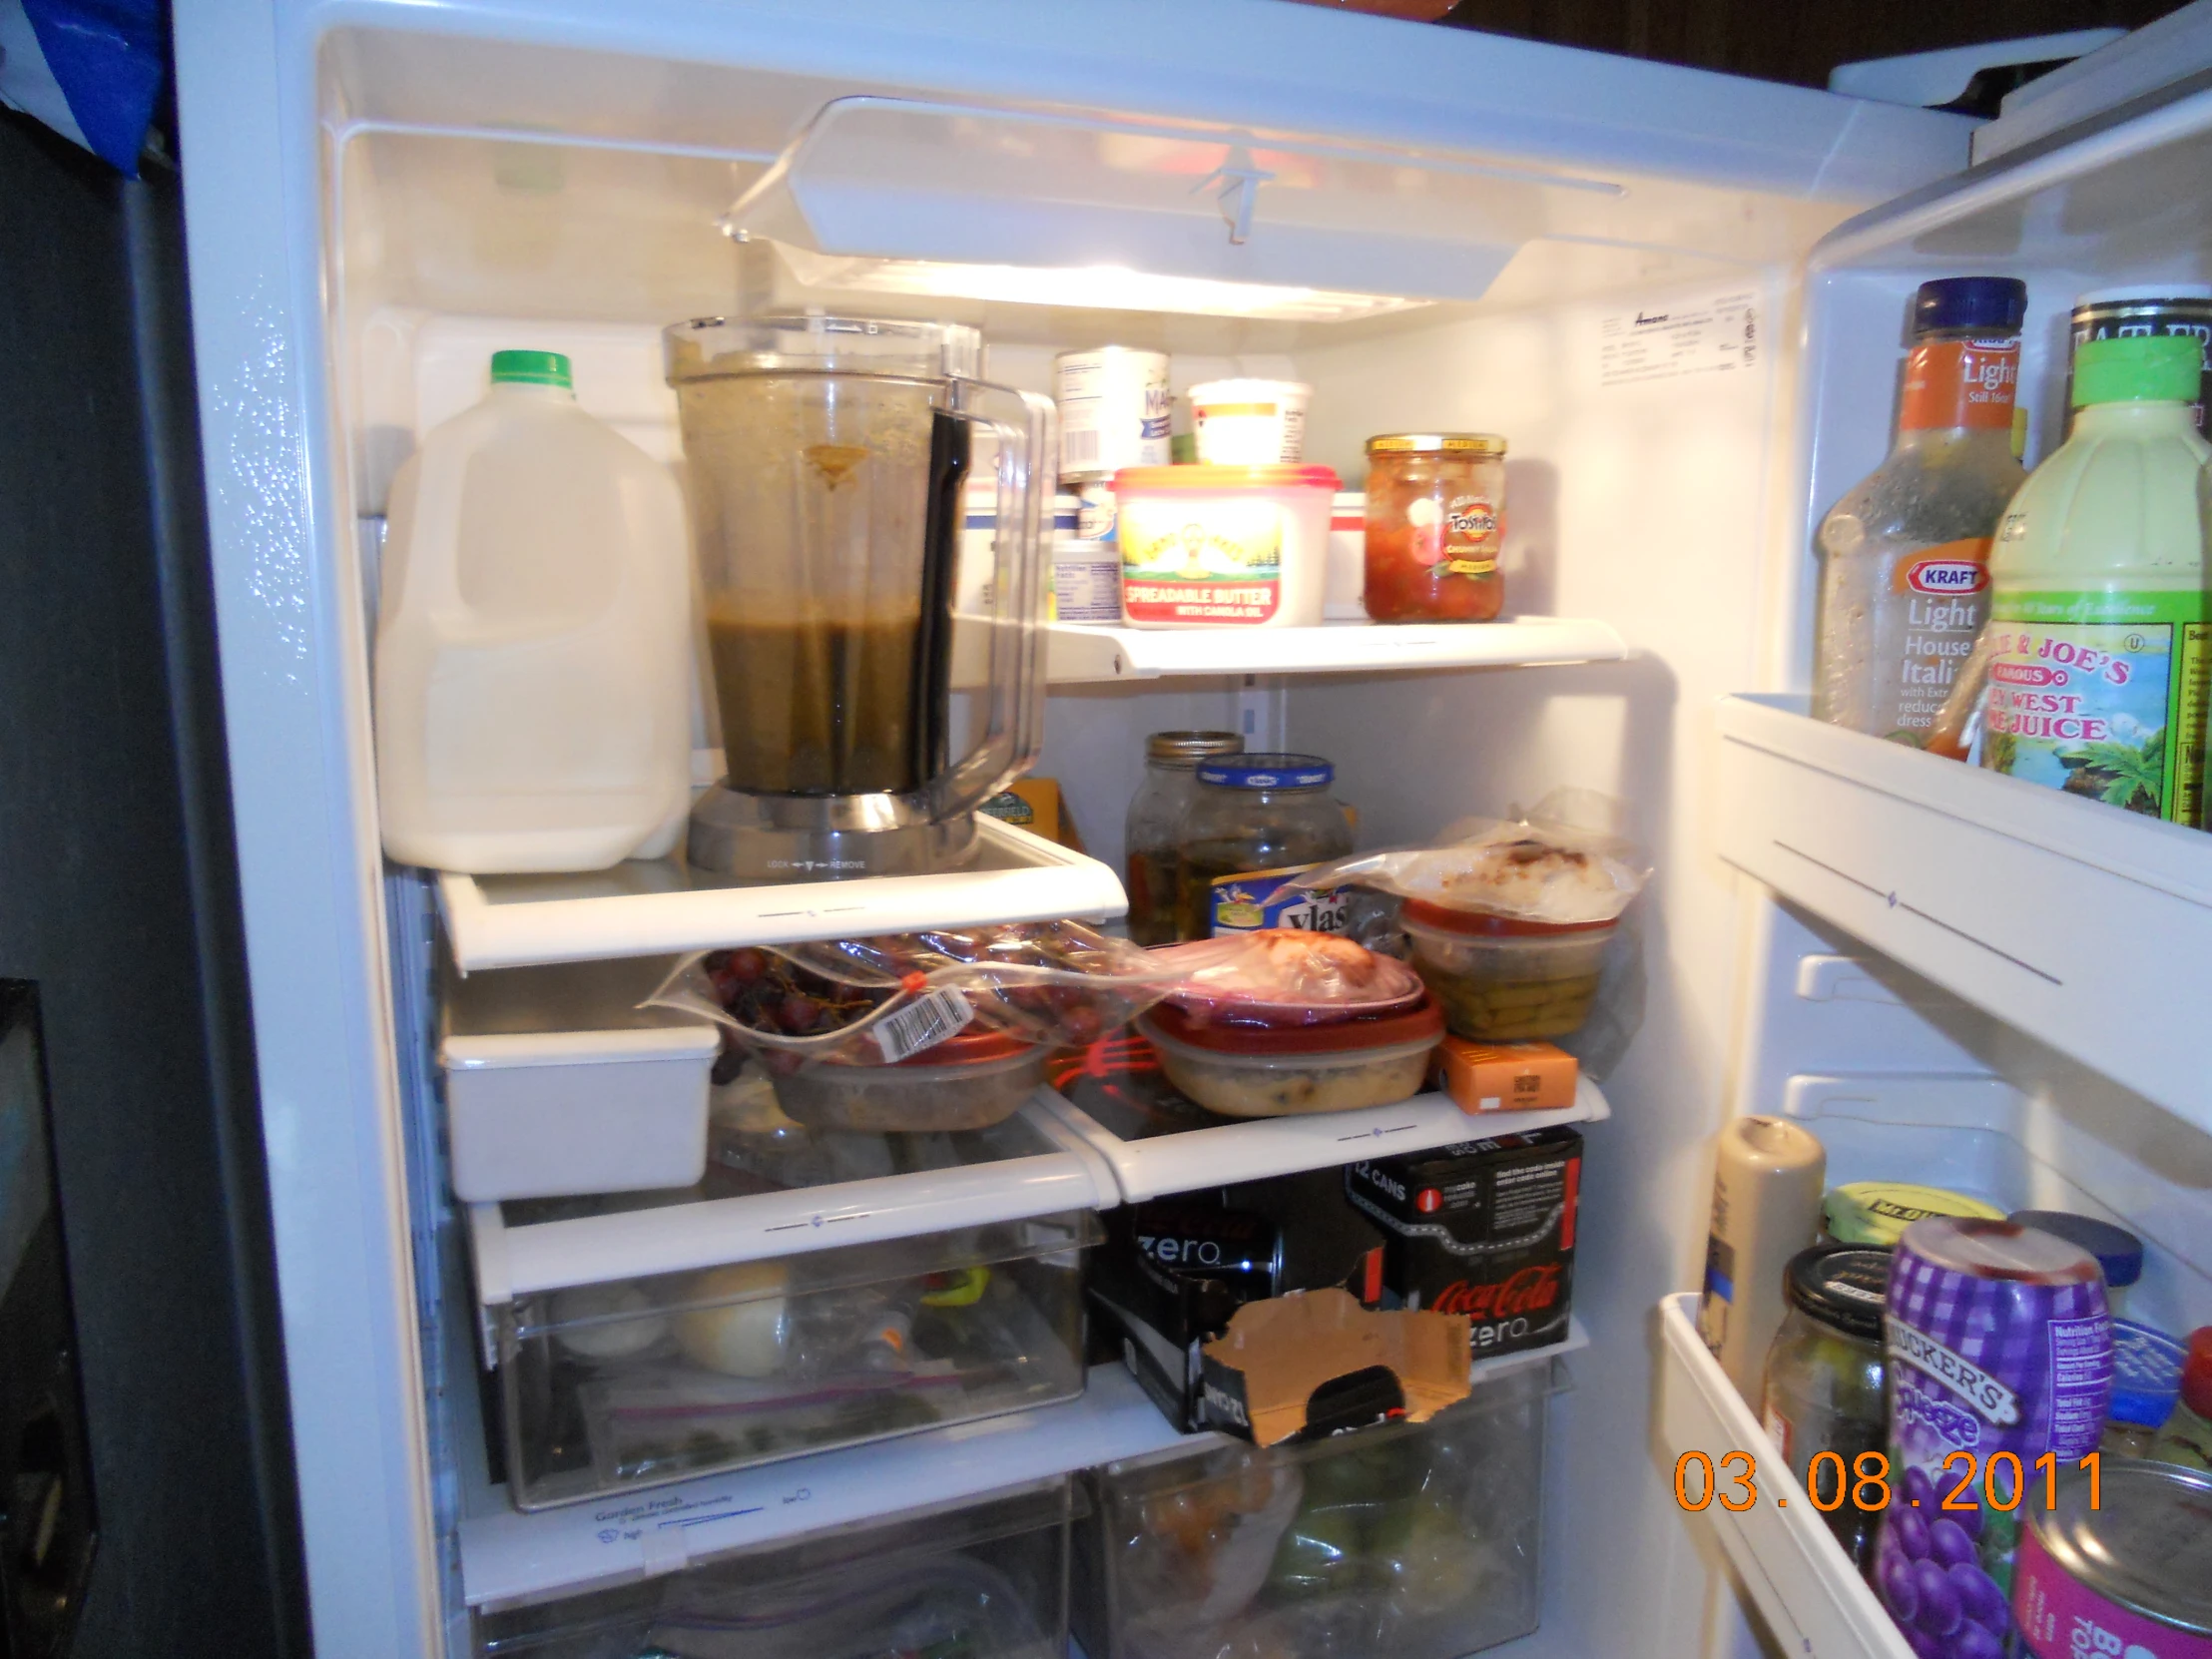 the fridge is filled with some food and drinks